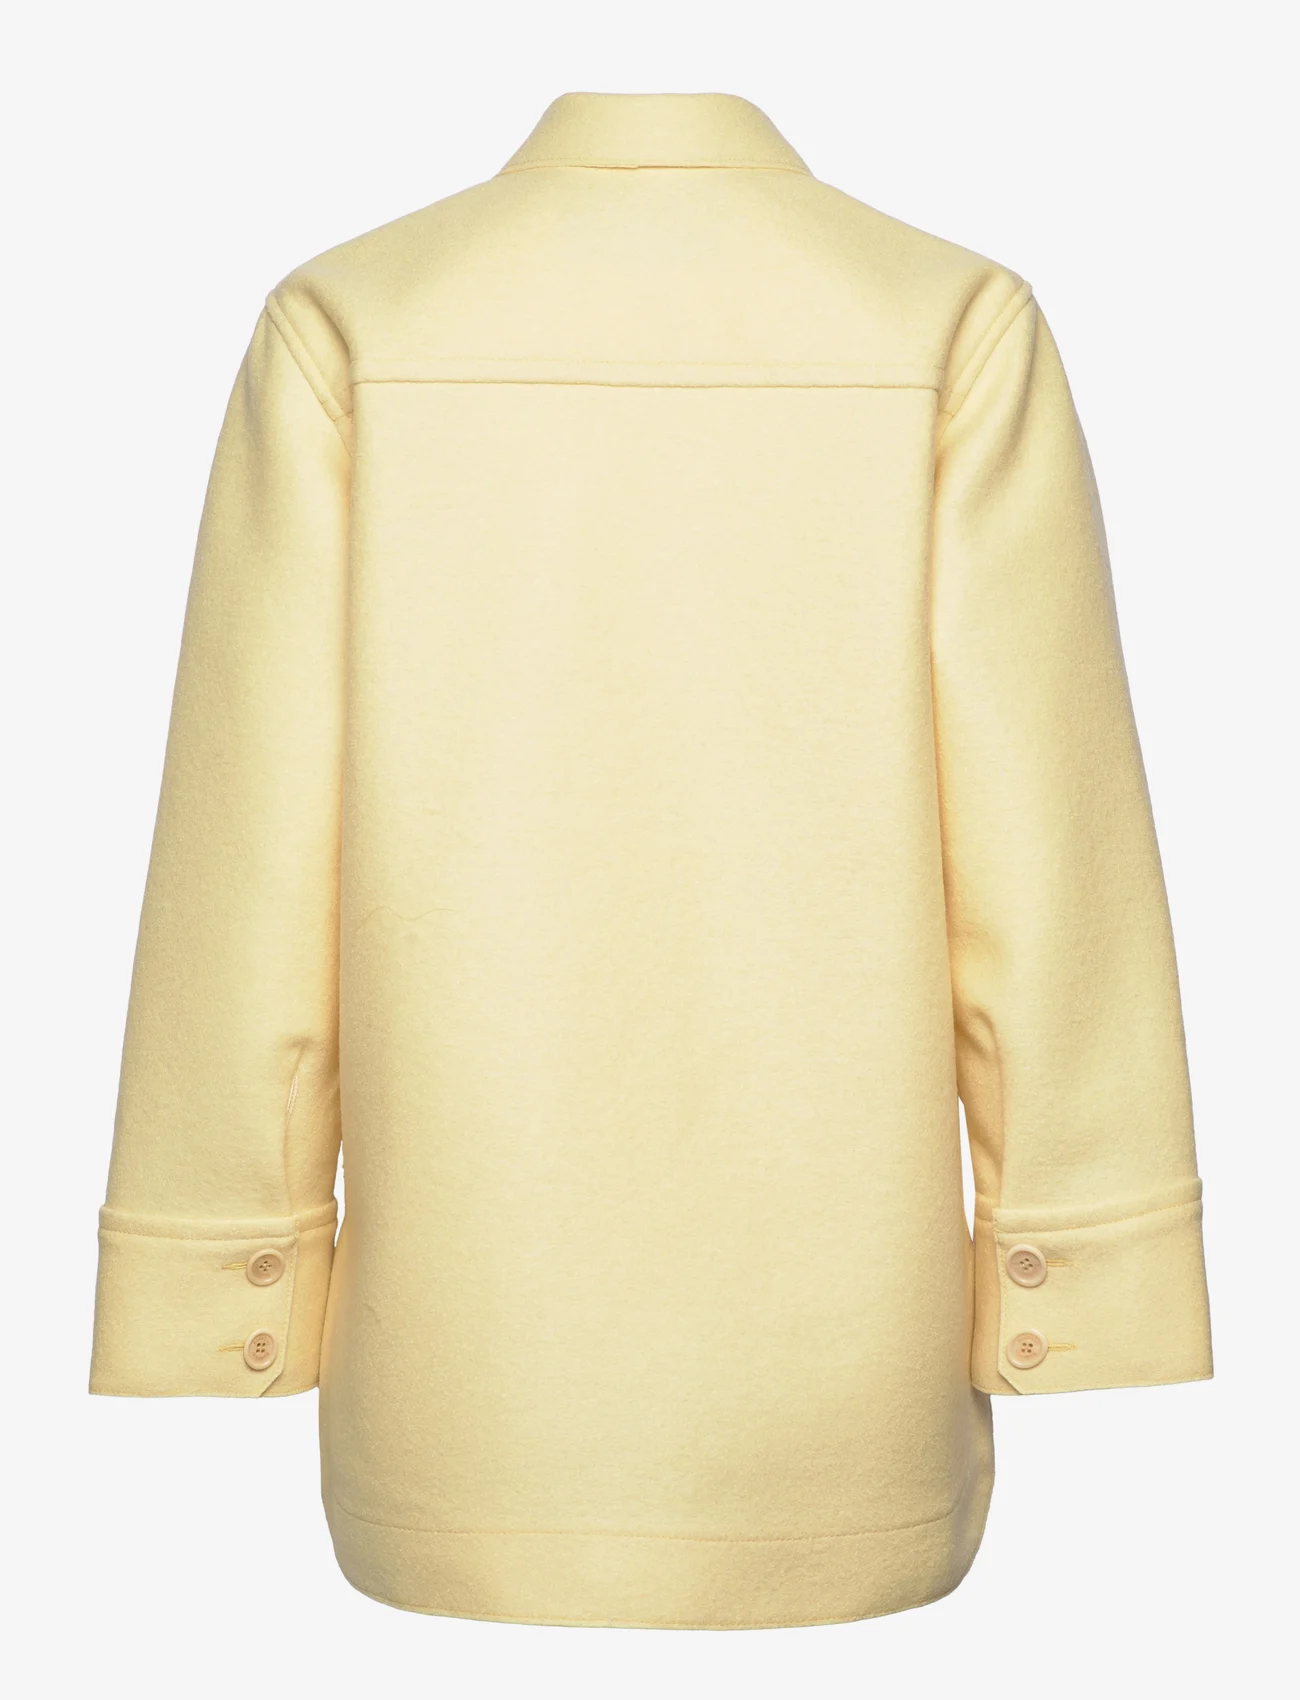 RODEBJER - Rodebjer Avril - wool jackets - butter milk - 1